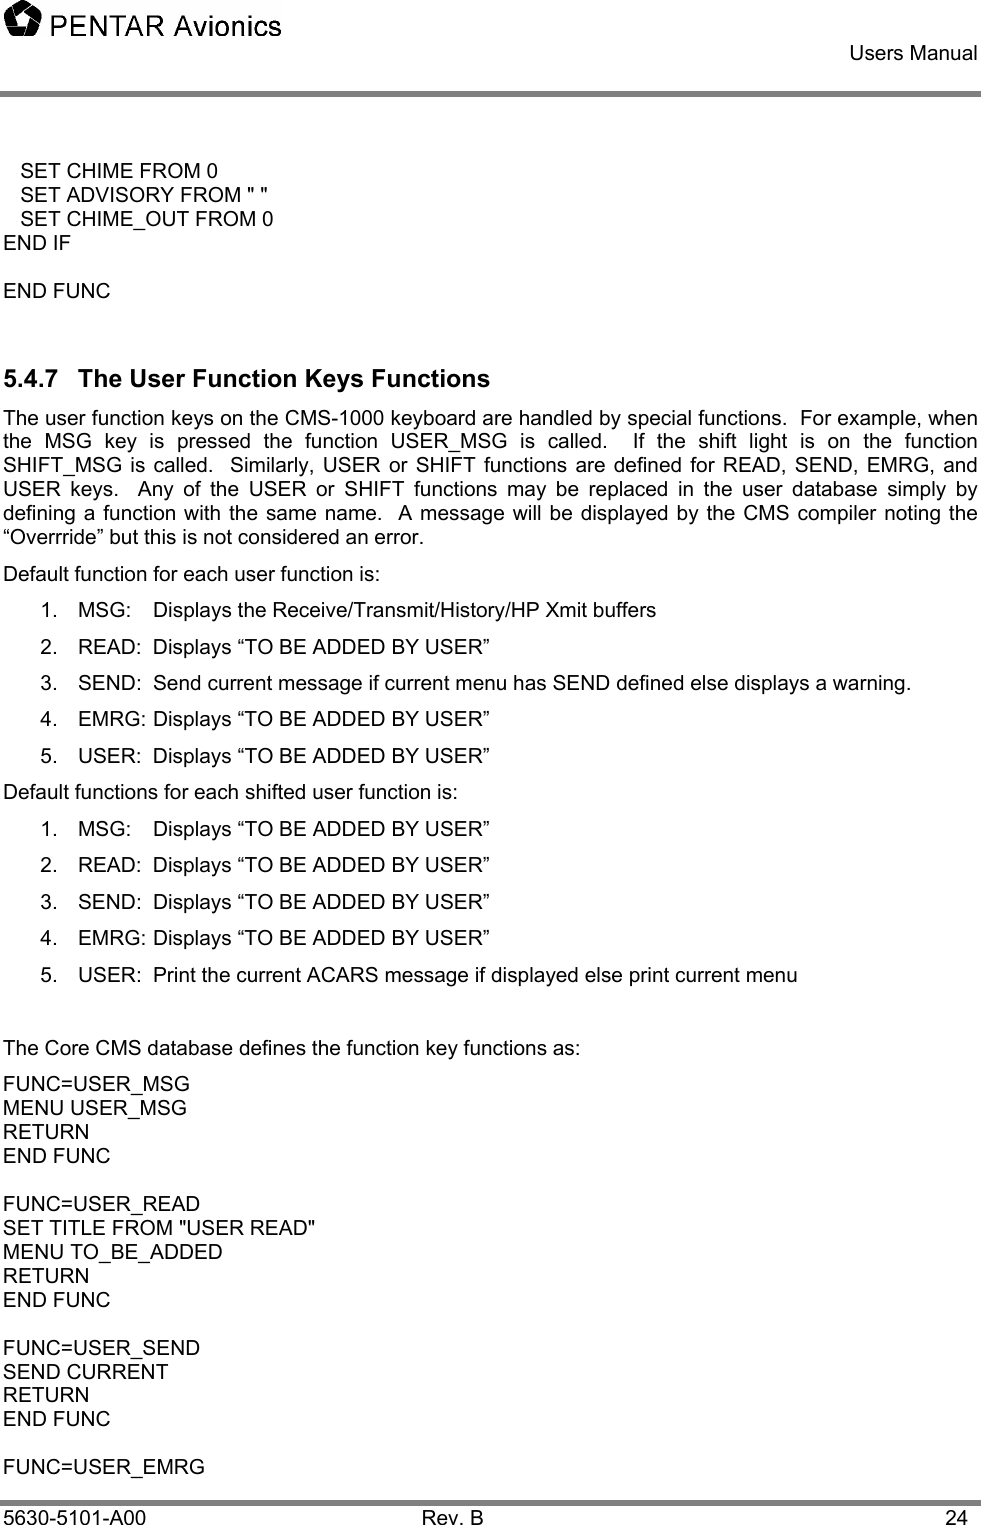    Users Manual    5630-5101-A00 Rev. B  24    SET CHIME FROM 0    SET ADVISORY FROM &quot; &quot;    SET CHIME_OUT FROM 0 END IF  END FUNC  5.4.7  The User Function Keys Functions The user function keys on the CMS-1000 keyboard are handled by special functions.  For example, when the MSG key is pressed the function USER_MSG is called.  If the shift light is on the function SHIFT_MSG is called.  Similarly, USER or SHIFT functions are defined for READ, SEND, EMRG, and USER keys.  Any of the USER or SHIFT functions may be replaced in the user database simply by defining a function with the same name.  A message will be displayed by the CMS compiler noting the “Overrride” but this is not considered an error.   Default function for each user function is: 1. MSG: Displays the Receive/Transmit/History/HP Xmit buffers 2.  READ:  Displays “TO BE ADDED BY USER” 3.  SEND:  Send current message if current menu has SEND defined else displays a warning. 4.  EMRG: Displays “TO BE ADDED BY USER” 5.  USER:  Displays “TO BE ADDED BY USER” Default functions for each shifted user function is: 1.  MSG:  Displays “TO BE ADDED BY USER” 2.  READ:  Displays “TO BE ADDED BY USER” 3.  SEND:  Displays “TO BE ADDED BY USER” 4.  EMRG: Displays “TO BE ADDED BY USER” 5.  USER:  Print the current ACARS message if displayed else print current menu  The Core CMS database defines the function key functions as: FUNC=USER_MSG   MENU USER_MSG RETURN END FUNC  FUNC=USER_READ SET TITLE FROM &quot;USER READ&quot; MENU TO_BE_ADDED RETURN END FUNC  FUNC=USER_SEND   SEND CURRENT   RETURN END FUNC  FUNC=USER_EMRG  